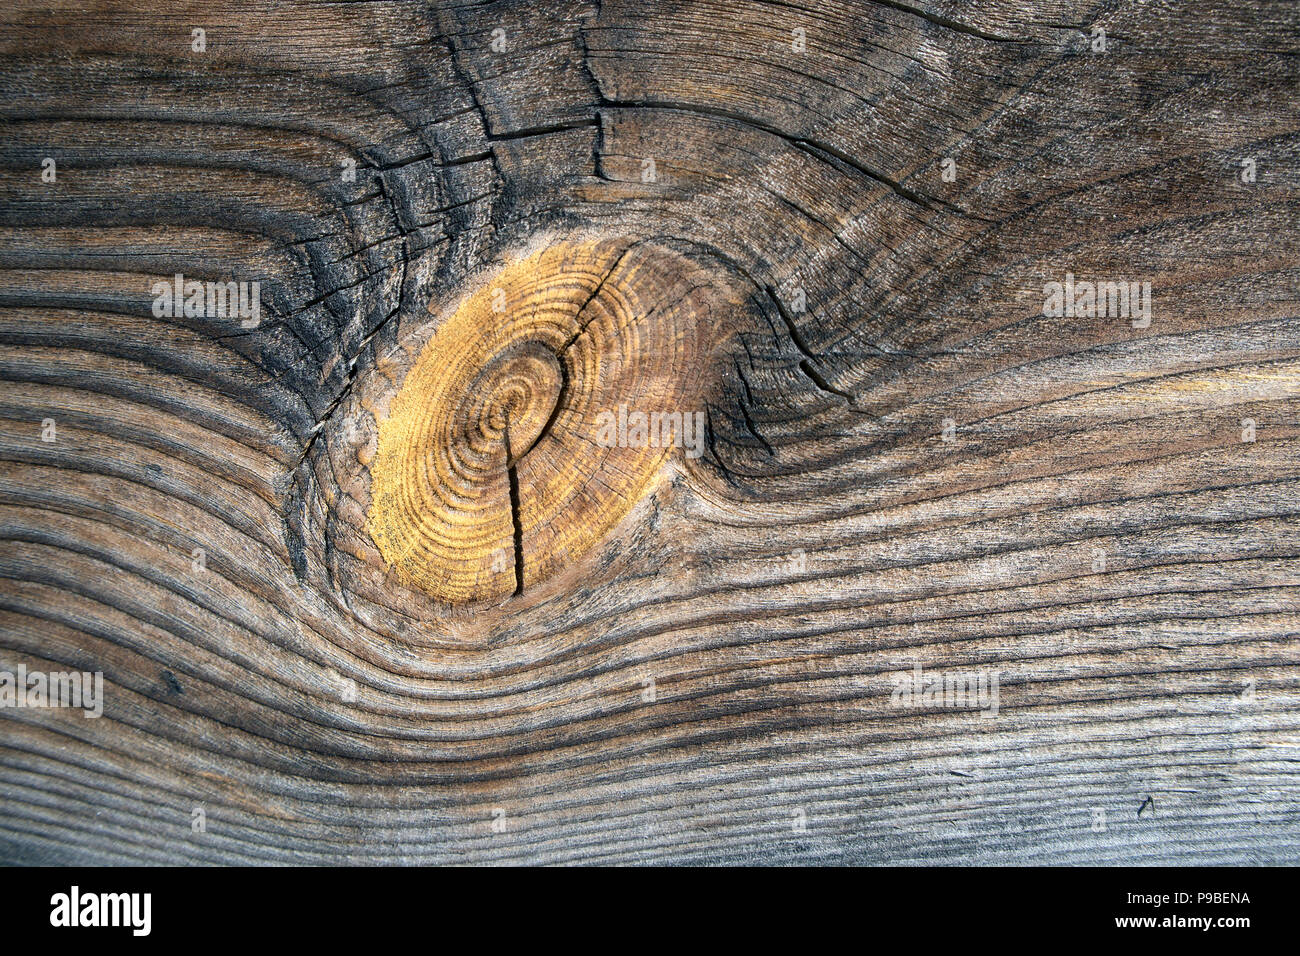 Old wooden planed board surface with big knot and cracks, may be used as background Stock Photo